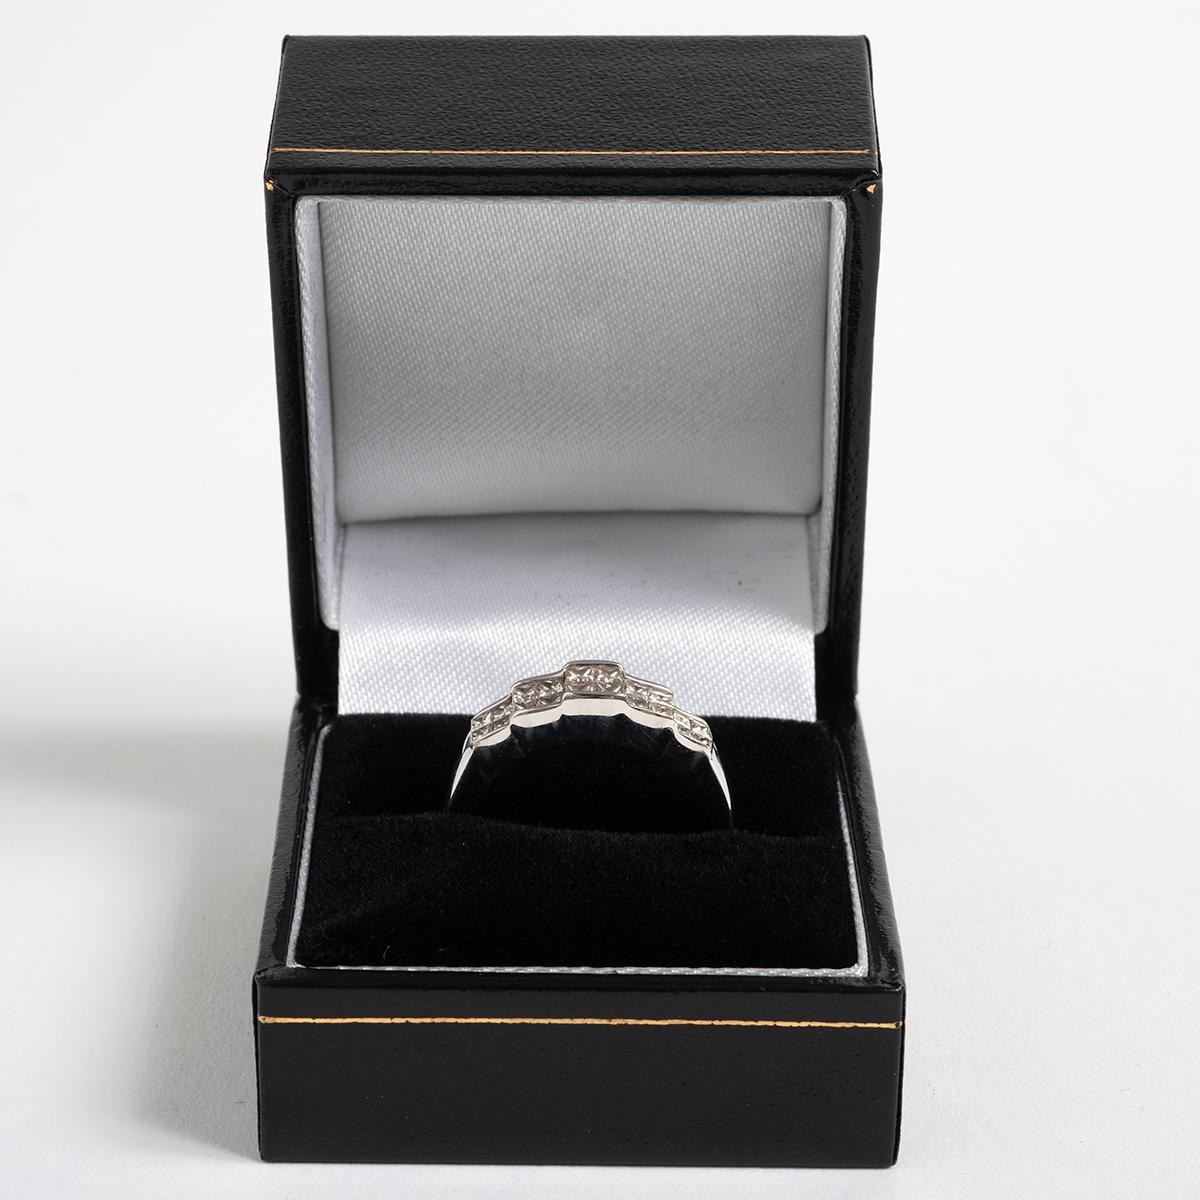 Stunning Princess Diamond Set Dress Ring, 14K Yellow Gold In Excellent Condition For Sale In Canterbury, GB